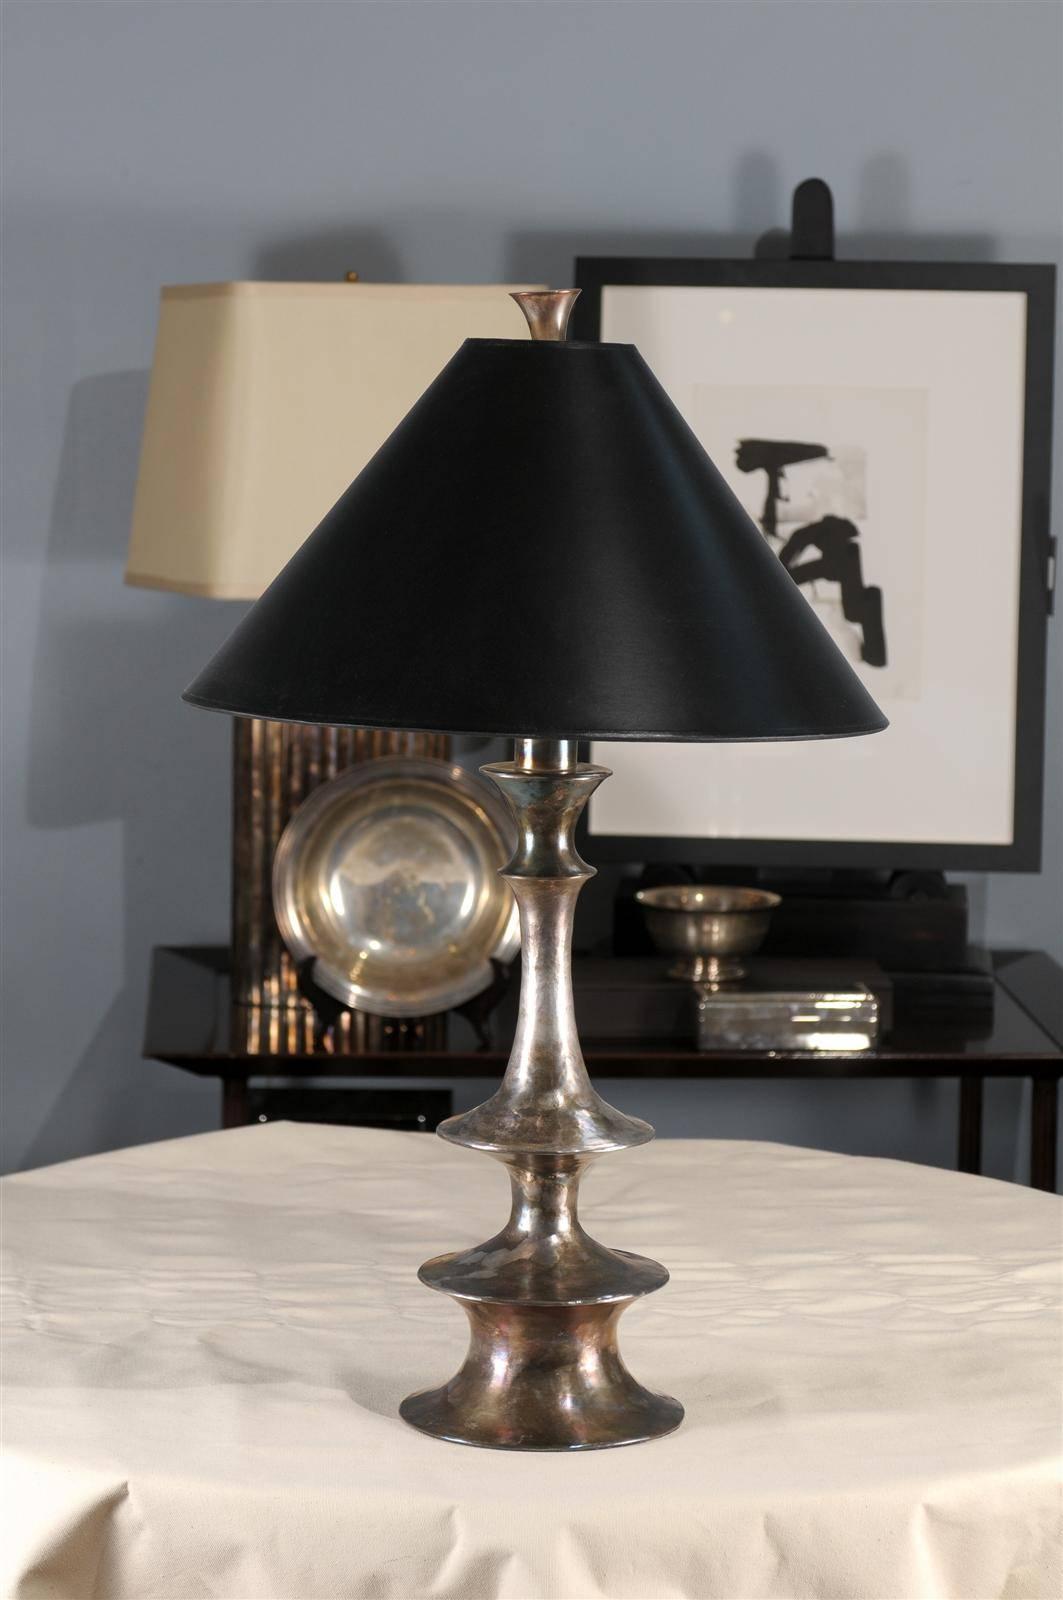 The fluid, curvilinear form of this grand table lamp is reminiscent of fanciful, decorative spindles. Yet while the inspiration may be traditional in feel, the proportions and asymmetry are unabashedly contemporary. The black copper lamp is paired